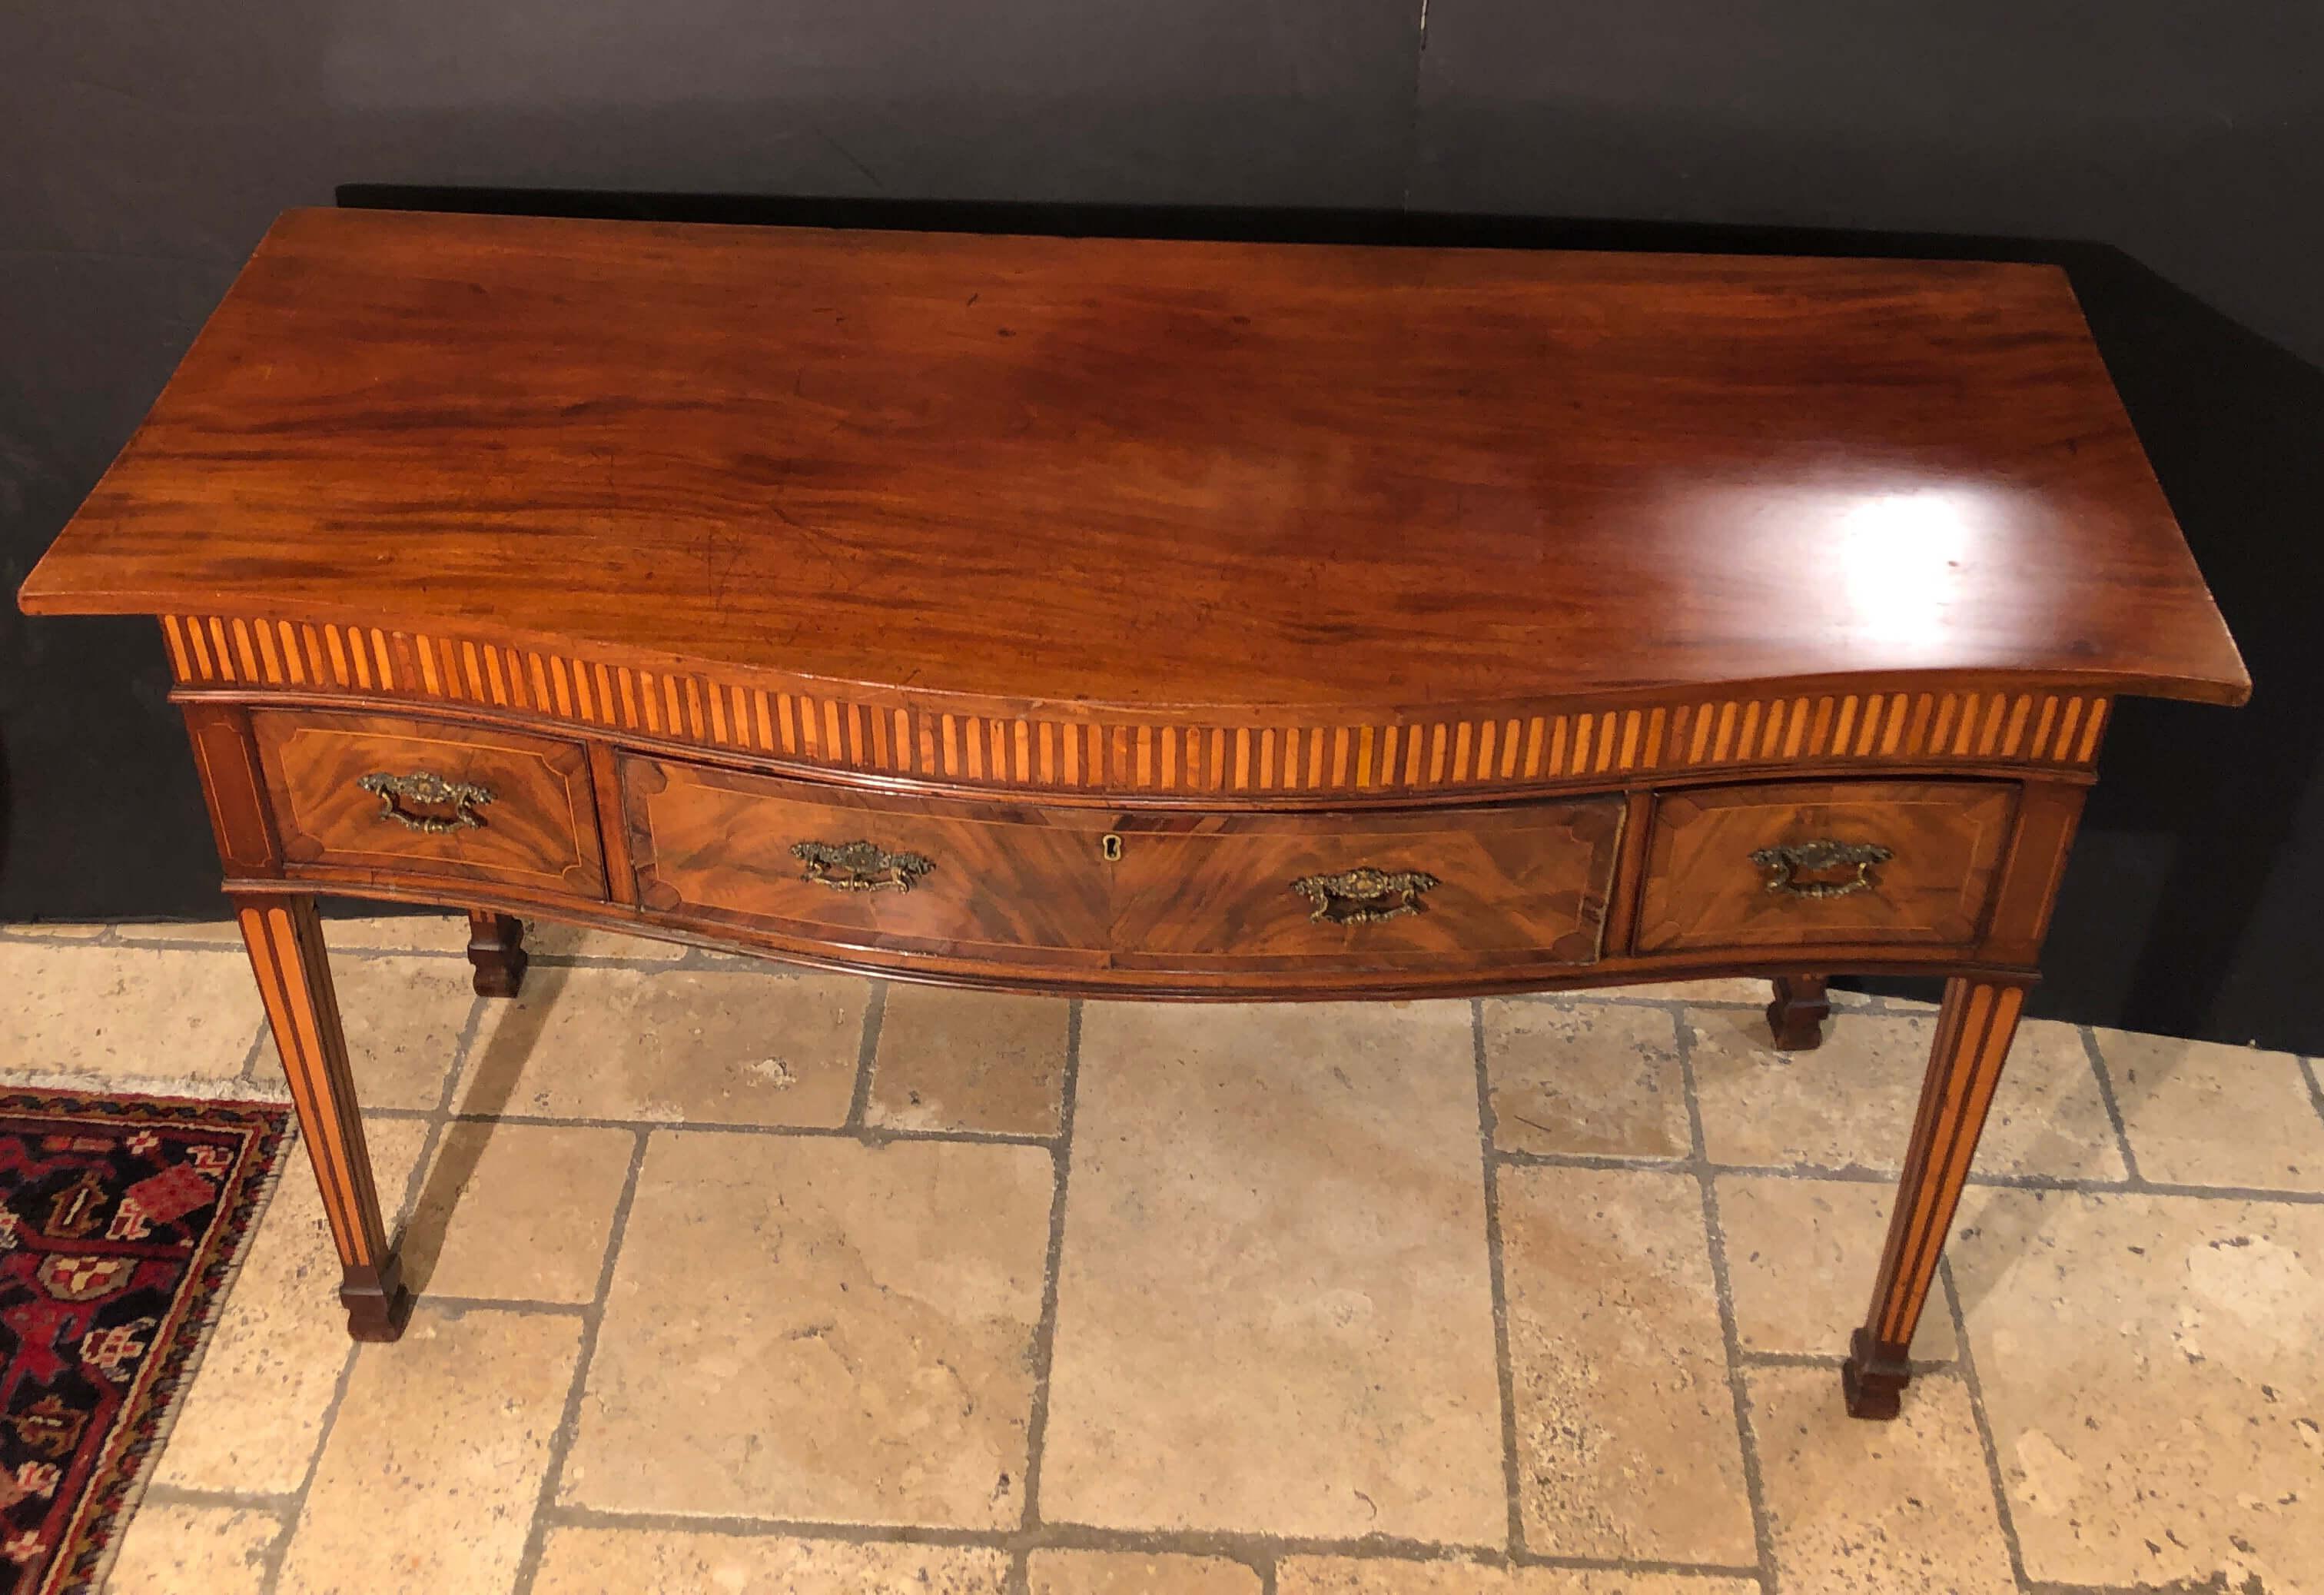 A Rare George III mahogany and satinwood inlaid serpentine sideboard with bookend inlaid frieze, a fitted serving drawer with baize lined top, square tapered bookend inlaid legs and Marlboro feet.